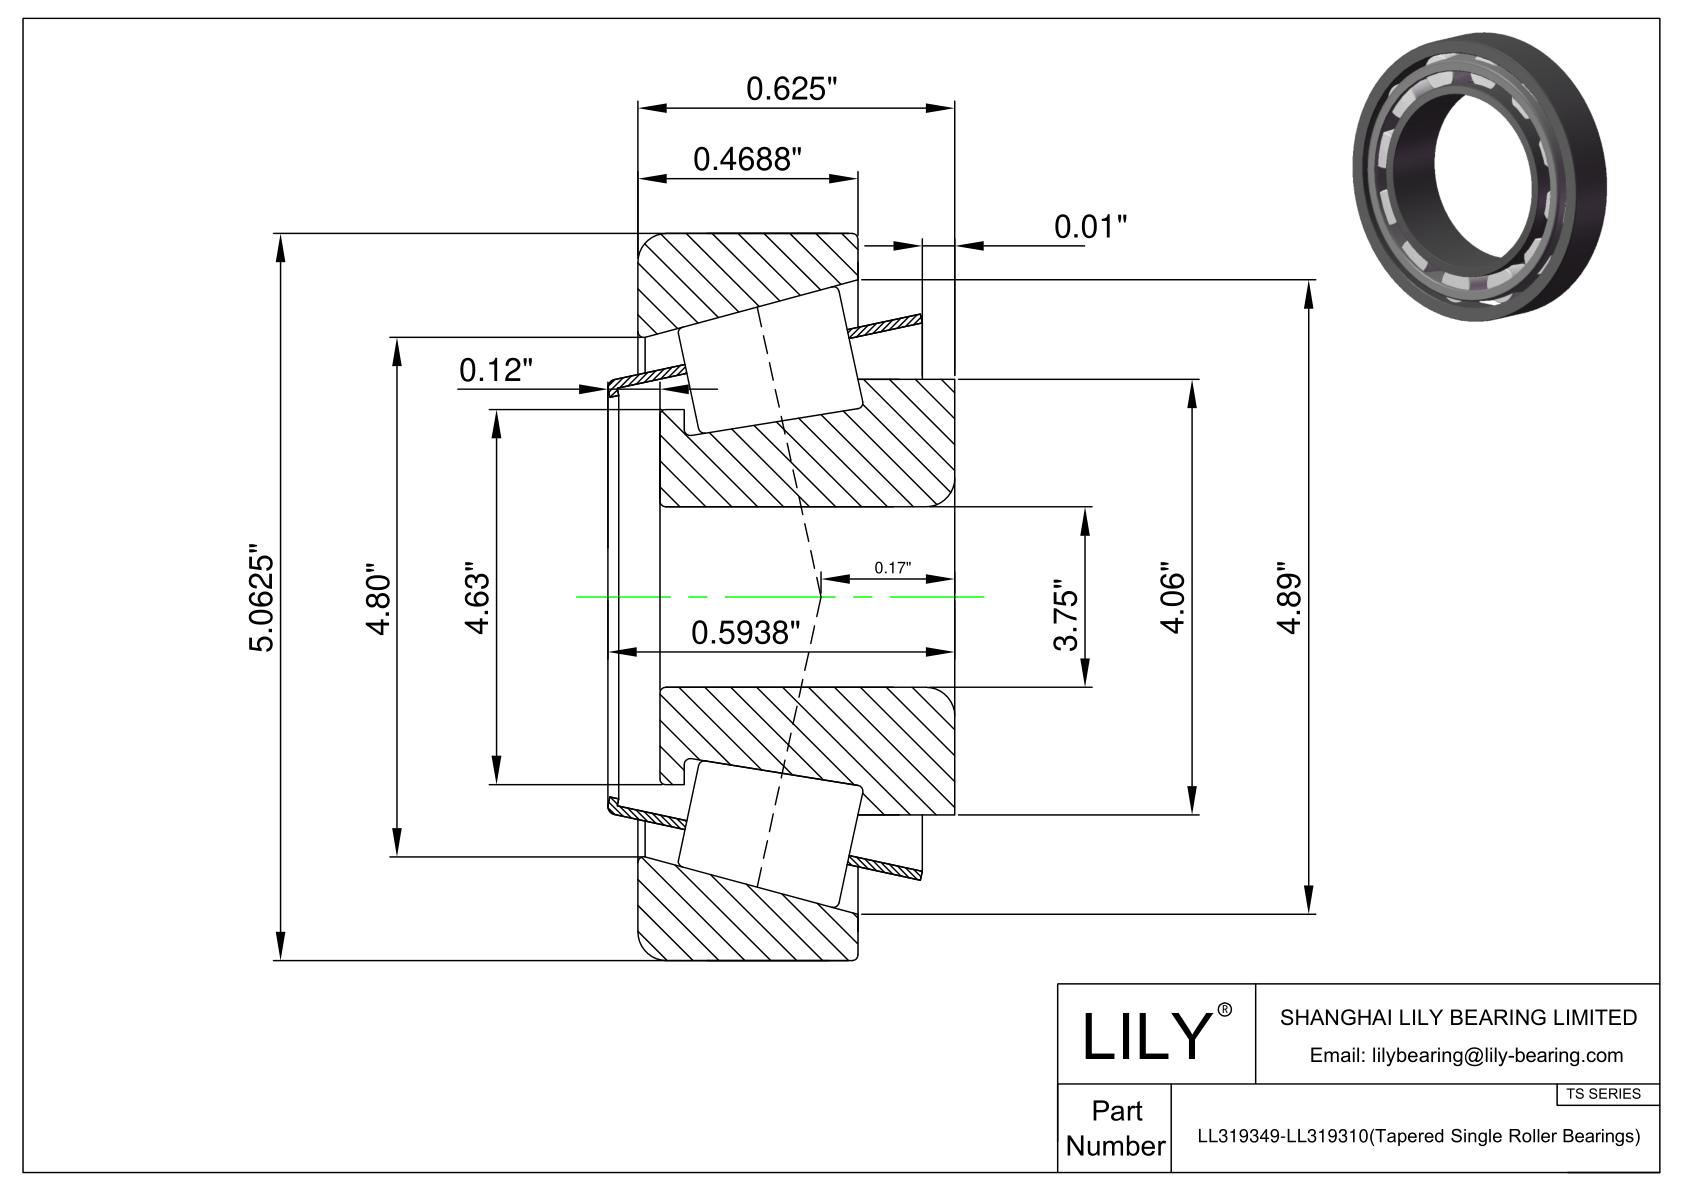 LL319349-LL319310 TS (Tapered Single Roller Bearings) (Imperial) cad drawing